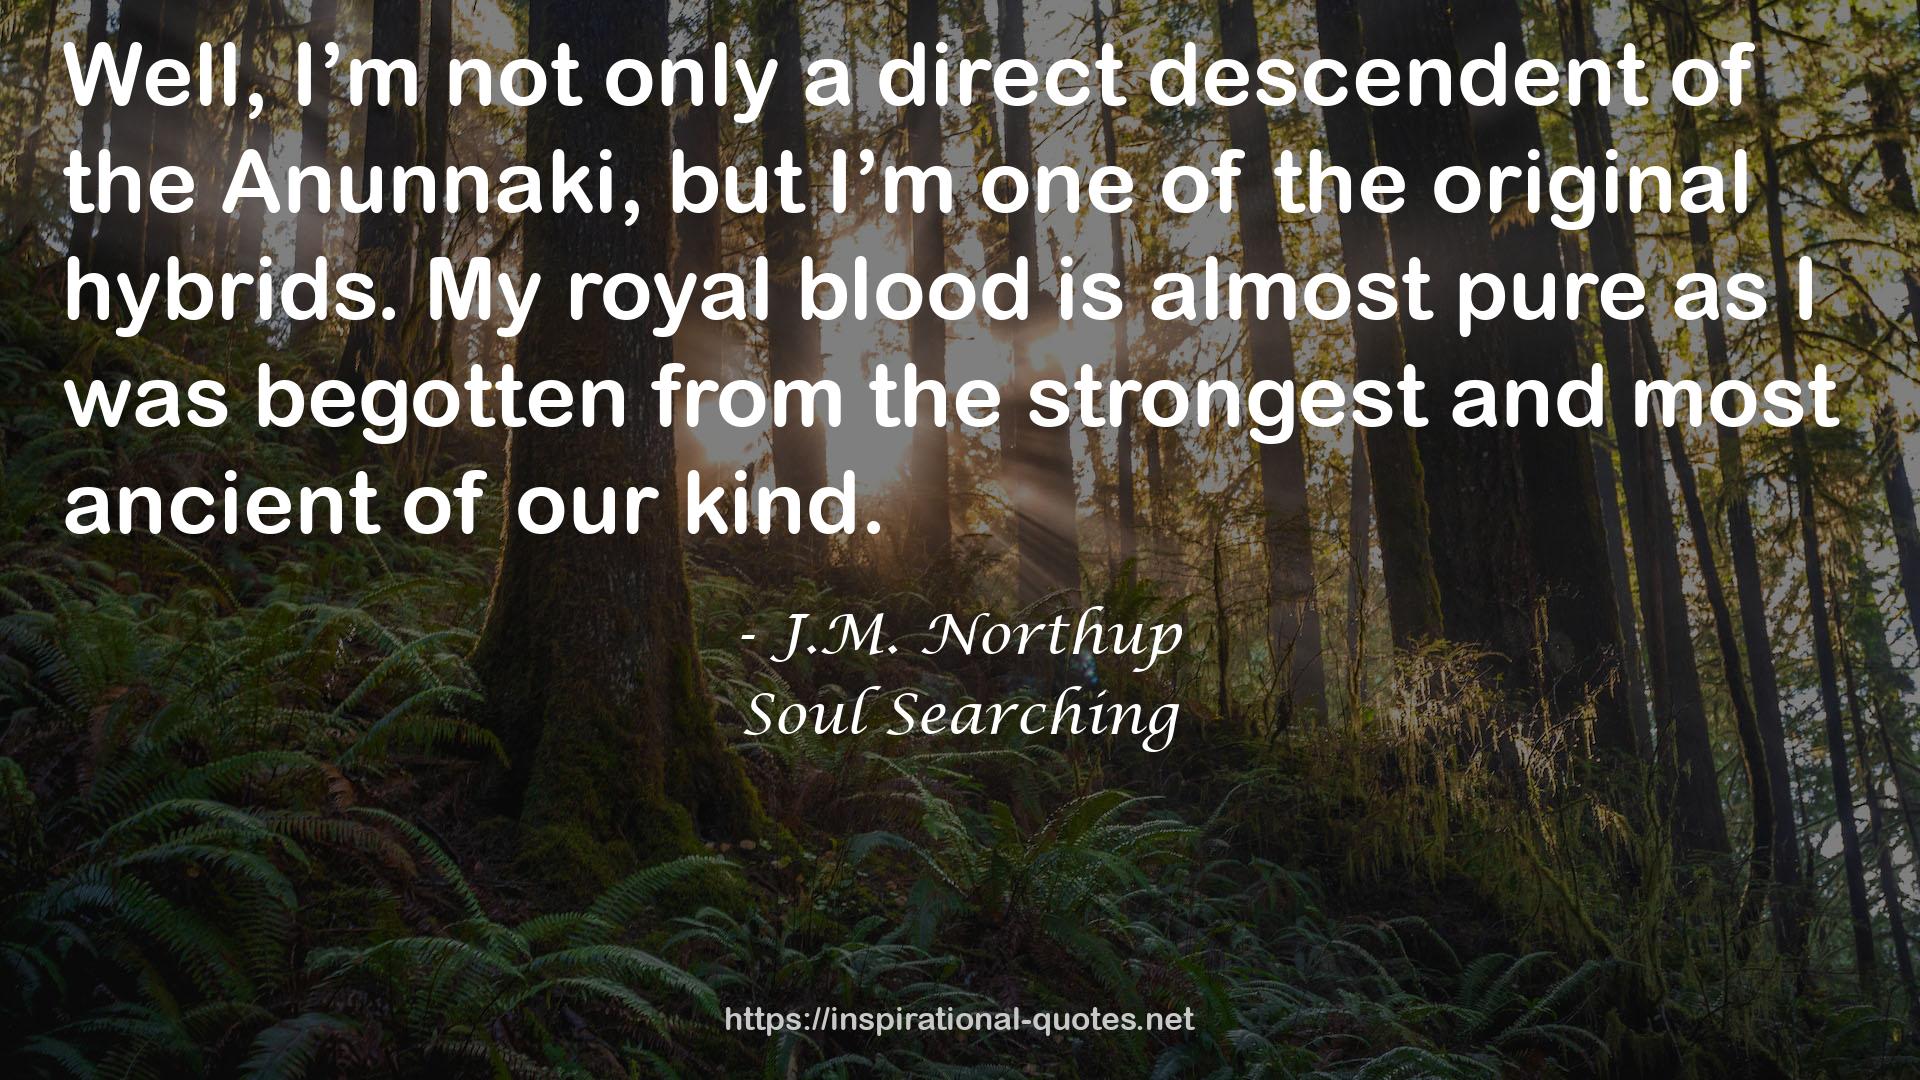 Soul Searching QUOTES